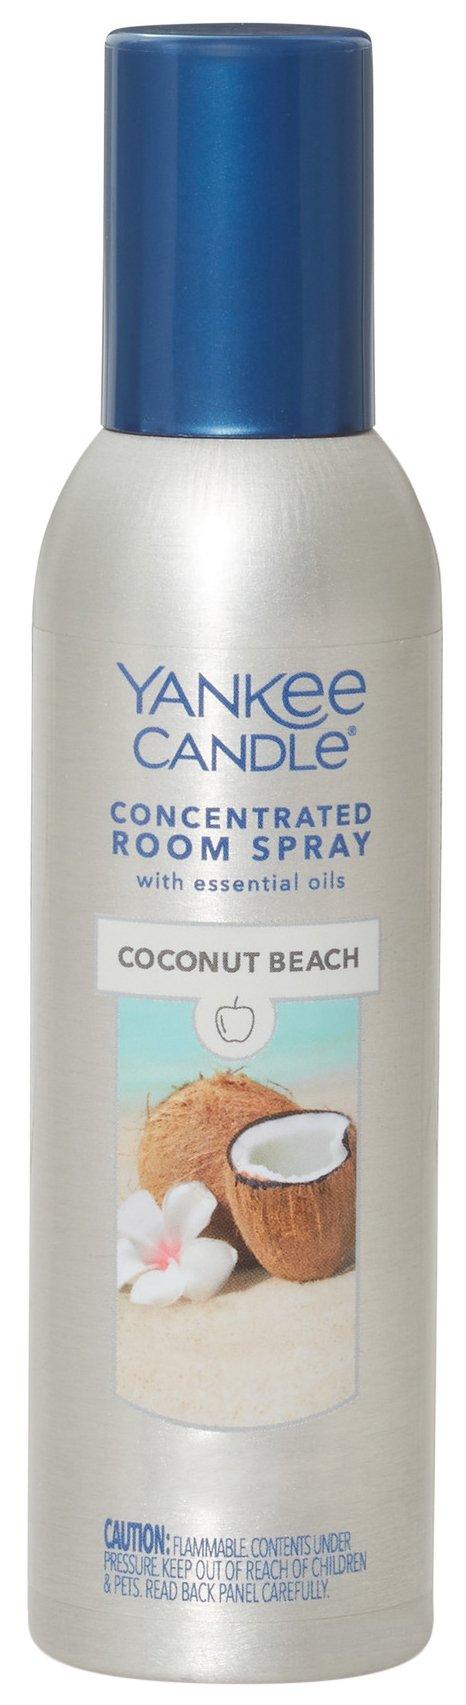 Yankee Candle Coconut Beach Concentrated Room Spray